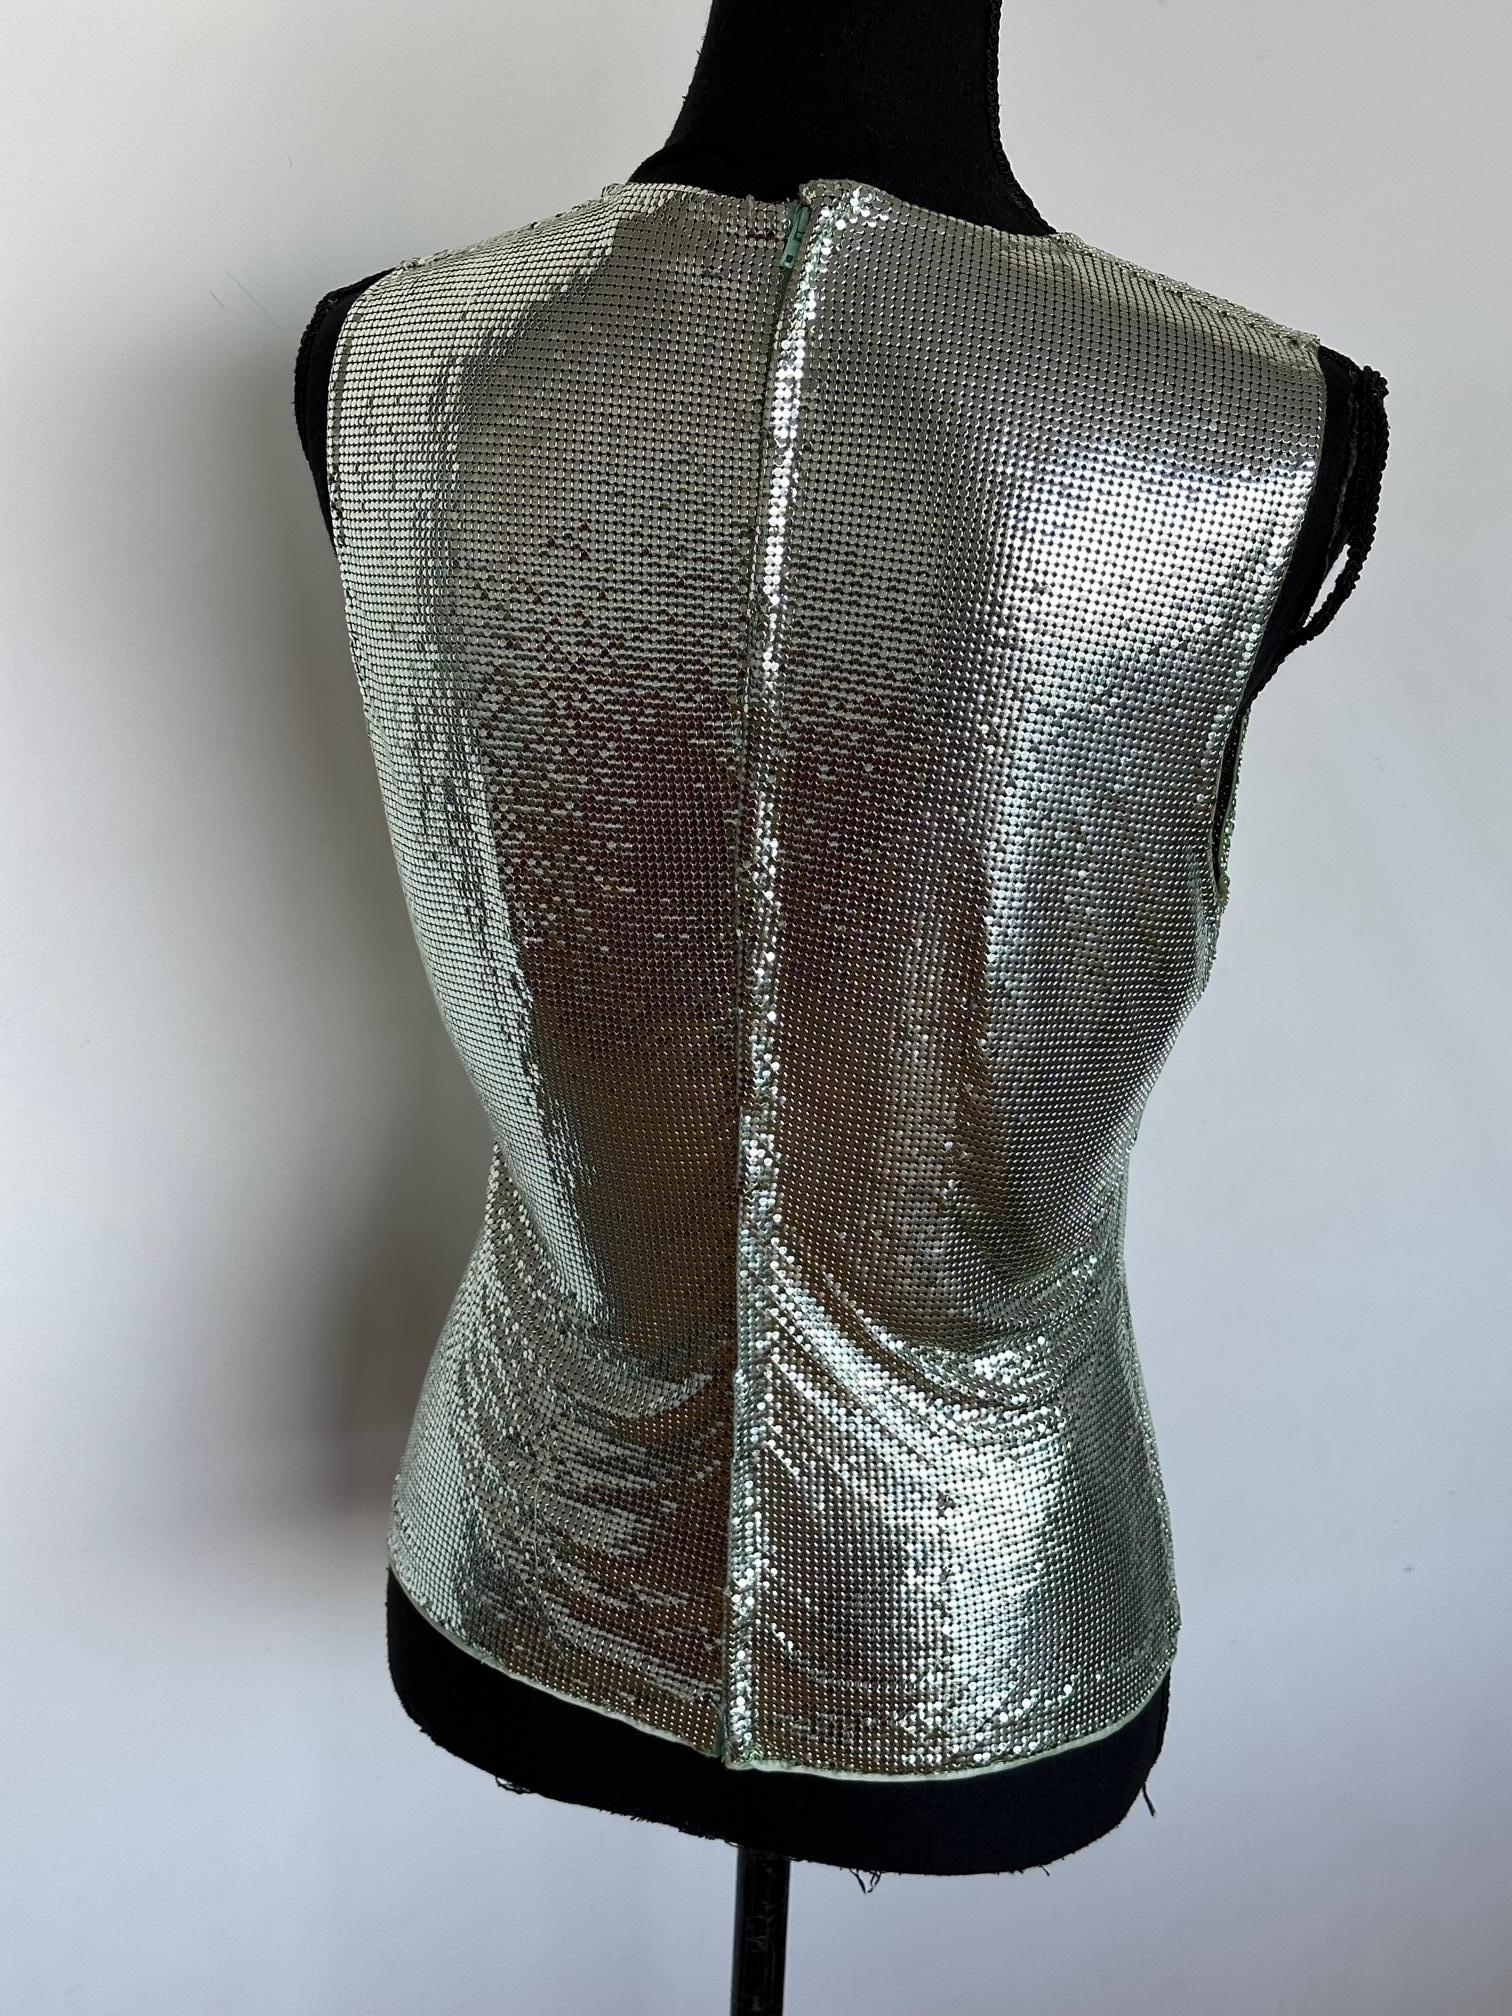 Gianni Versace Couture Metallic Mesh Top For Sale 1